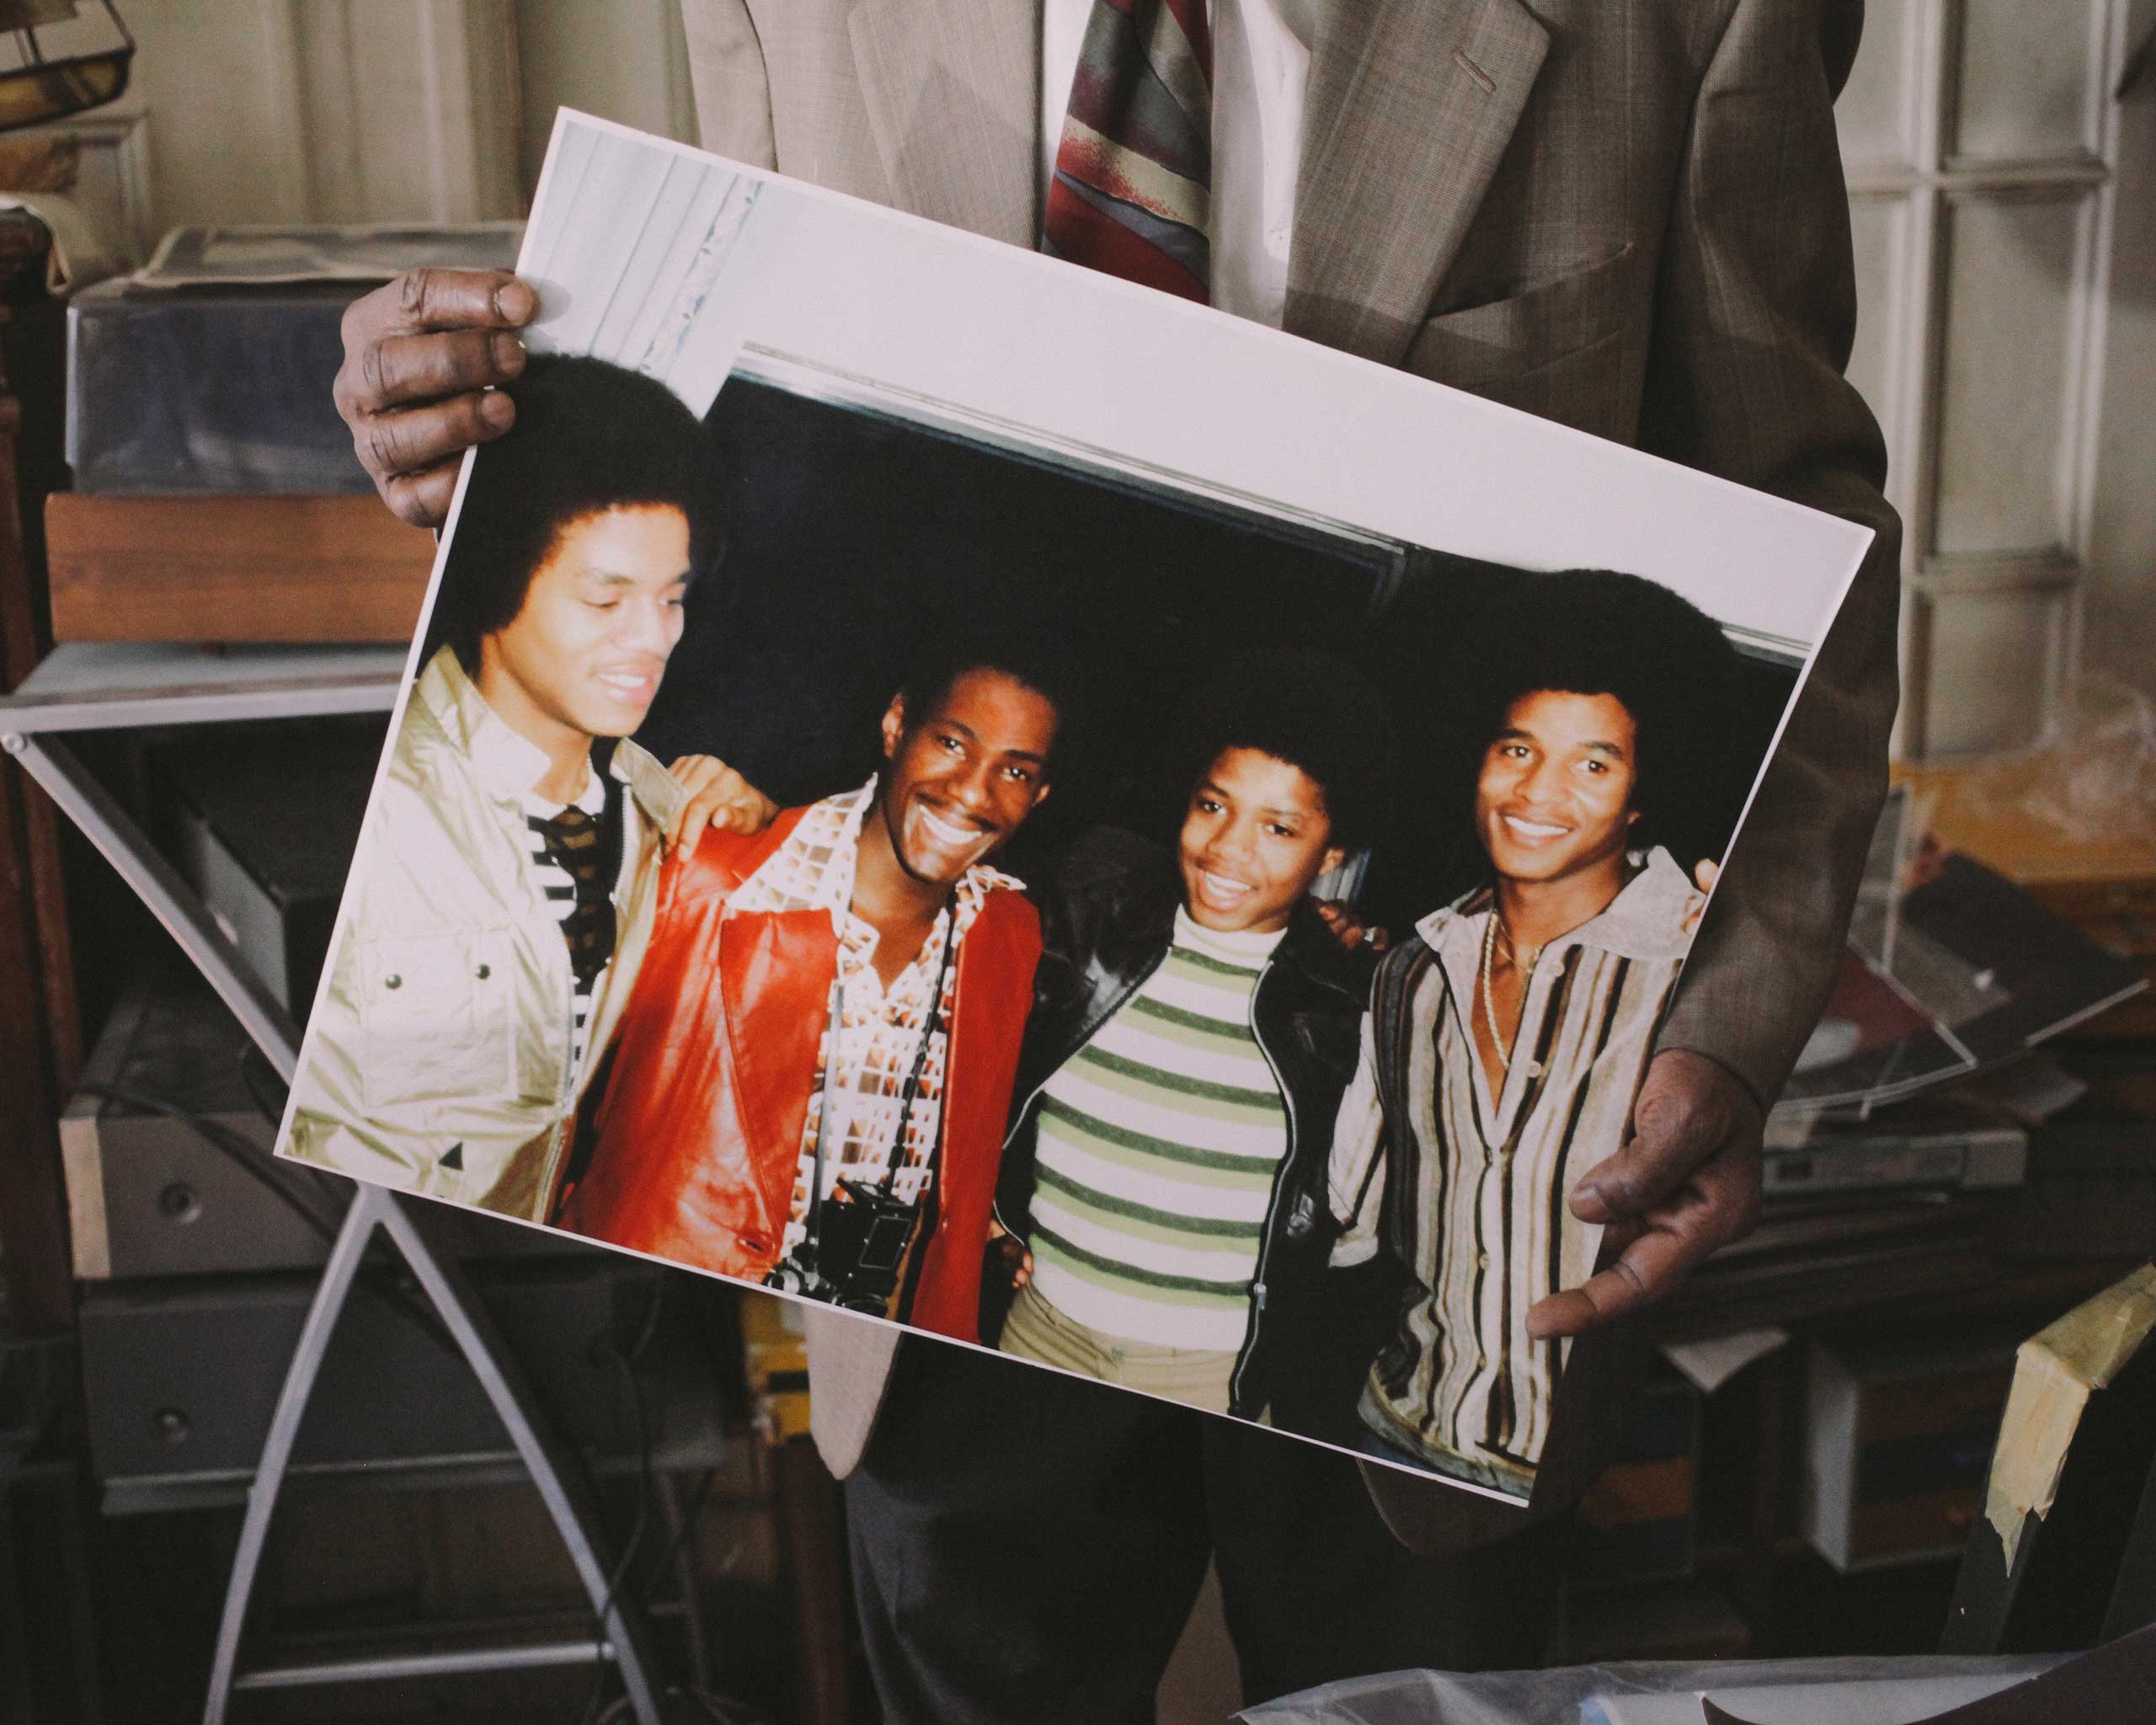 Alix Dejean holds a photo of himself with the Jacksons. (Nathan Bajar)